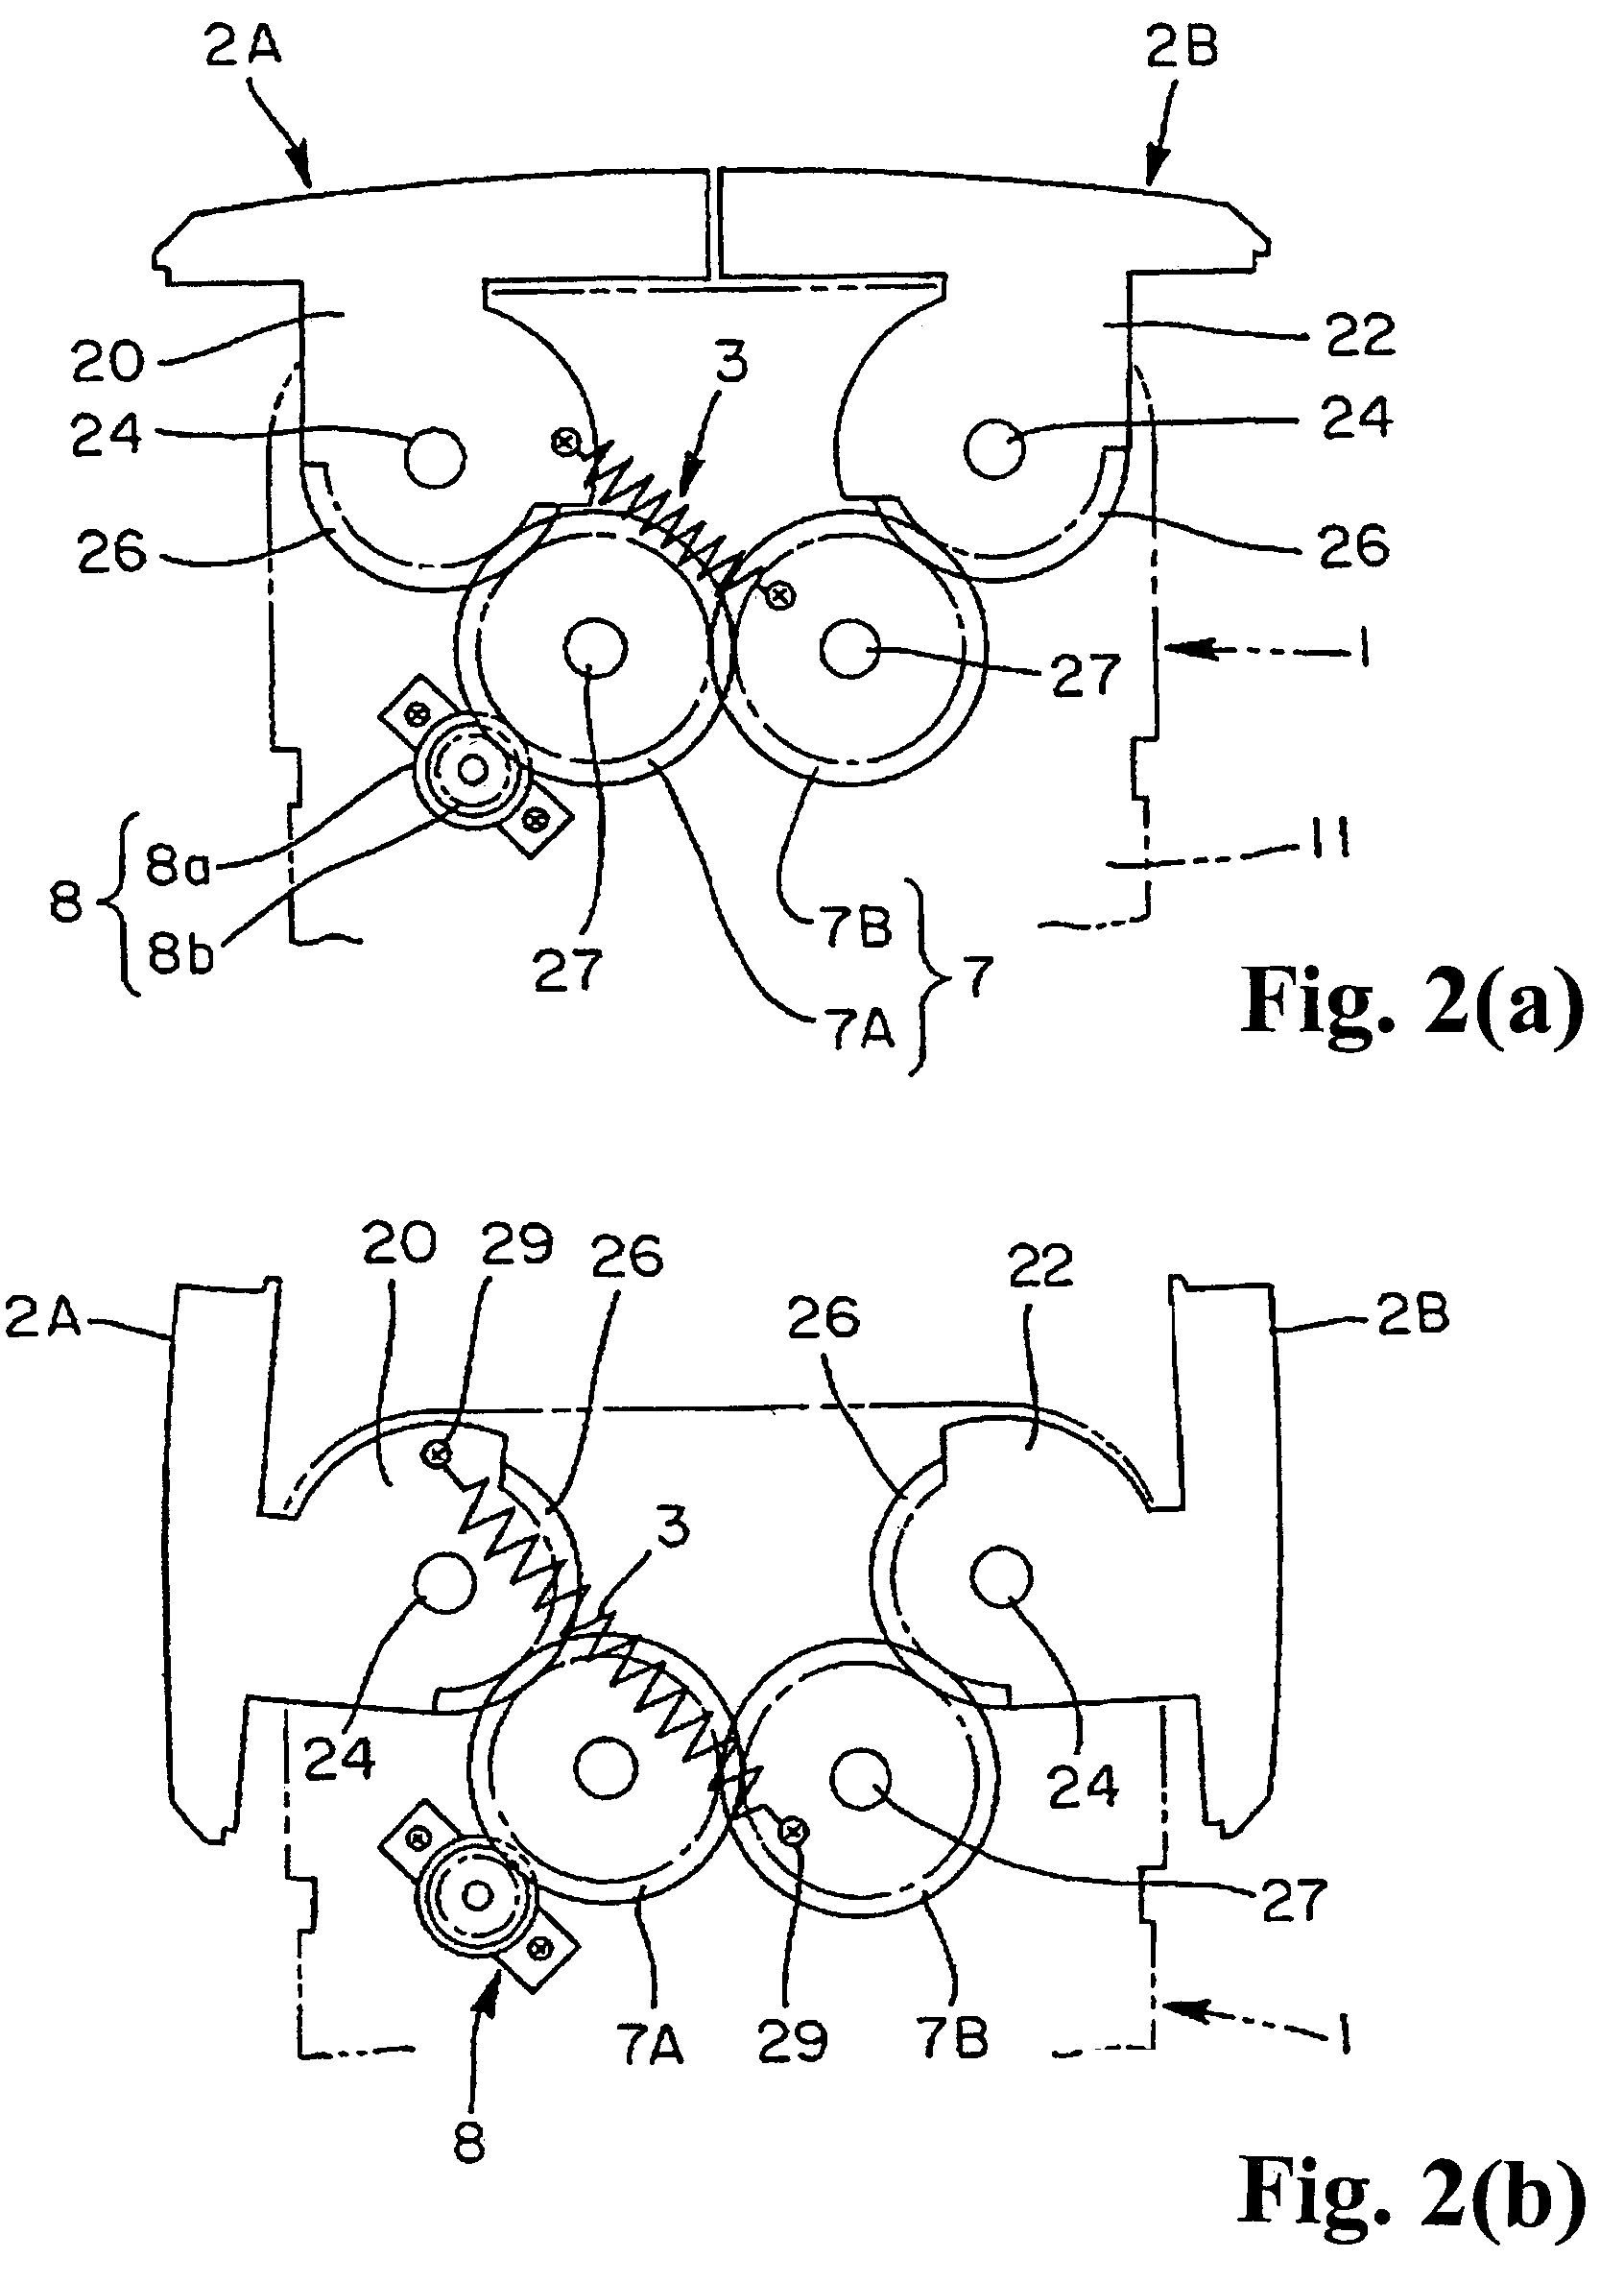 Cover opening and closing device